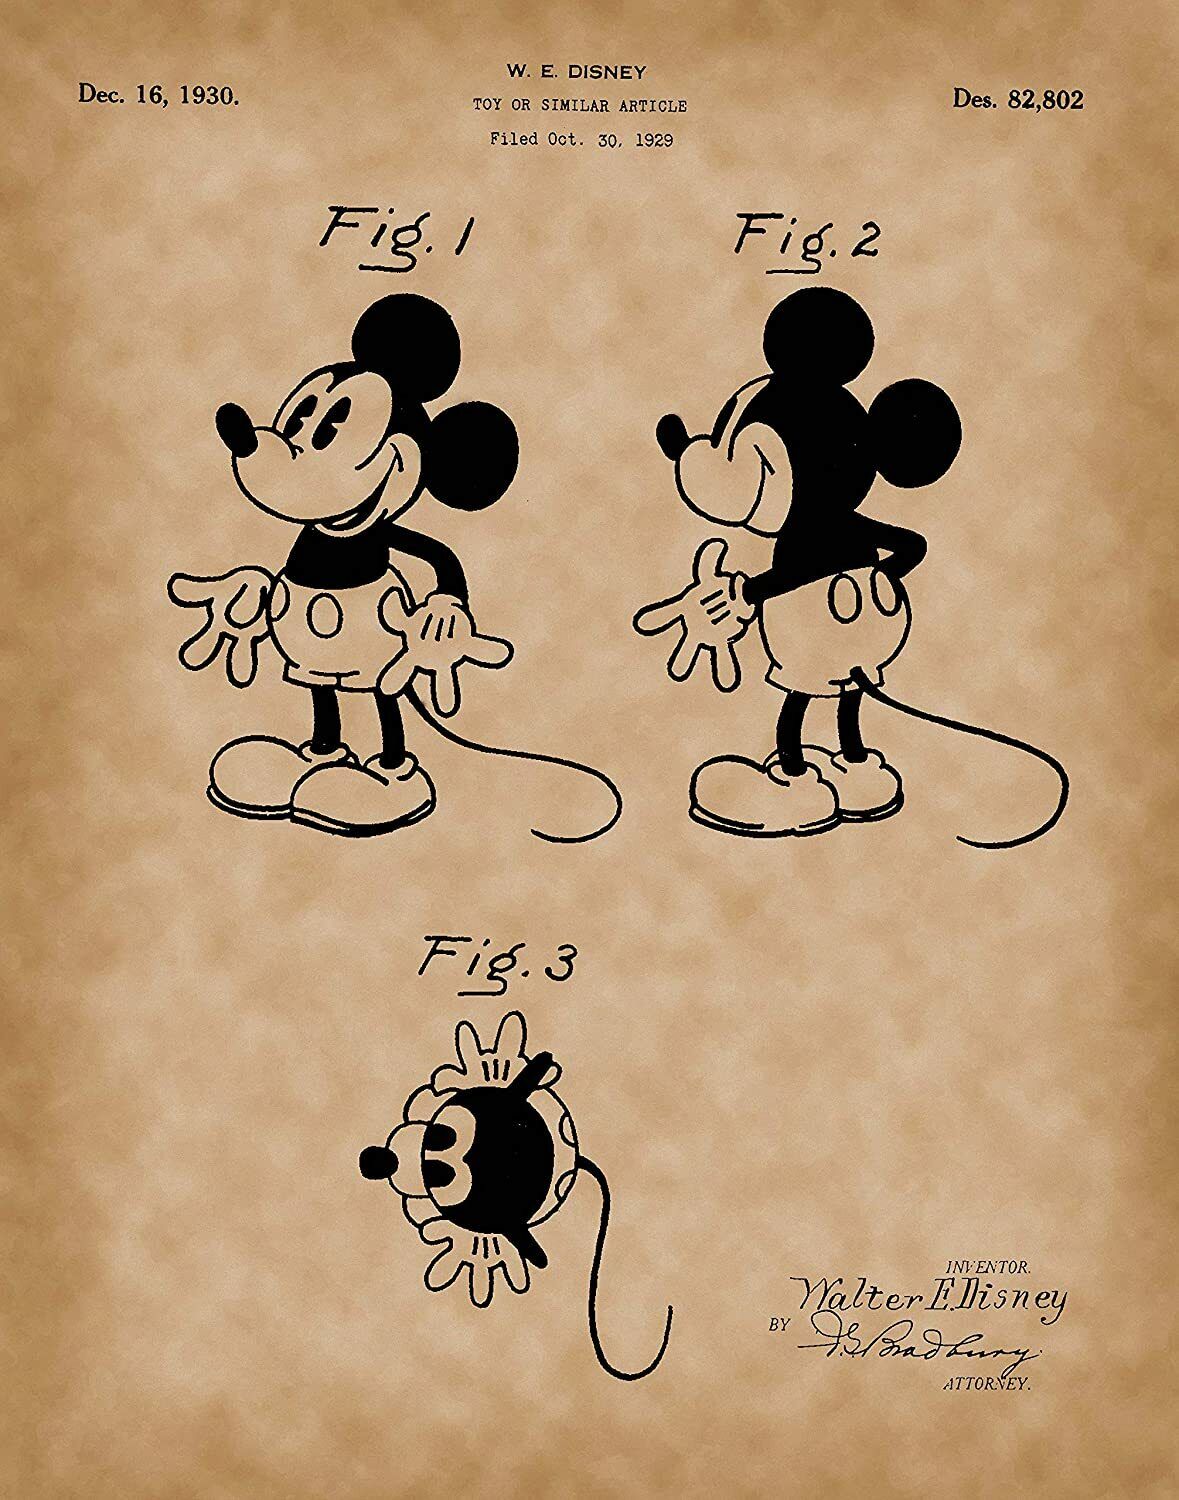 Patent Poster Art - Disney Mickey Mouse Toy Patent - Old Antique Parchment Look